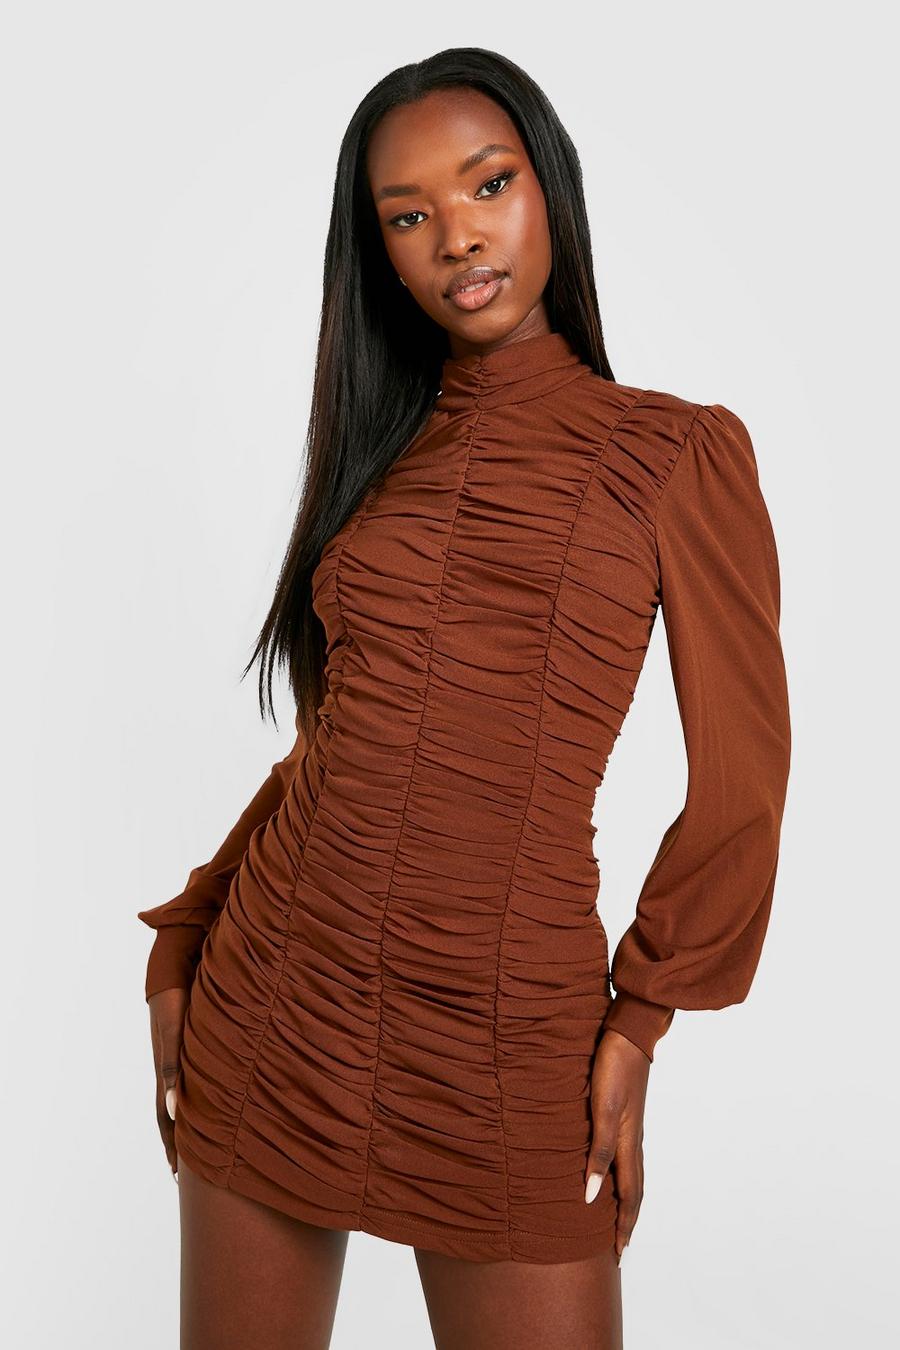 Chocolate brown Petite Mesh Ruched High Neck Bodycon Dress